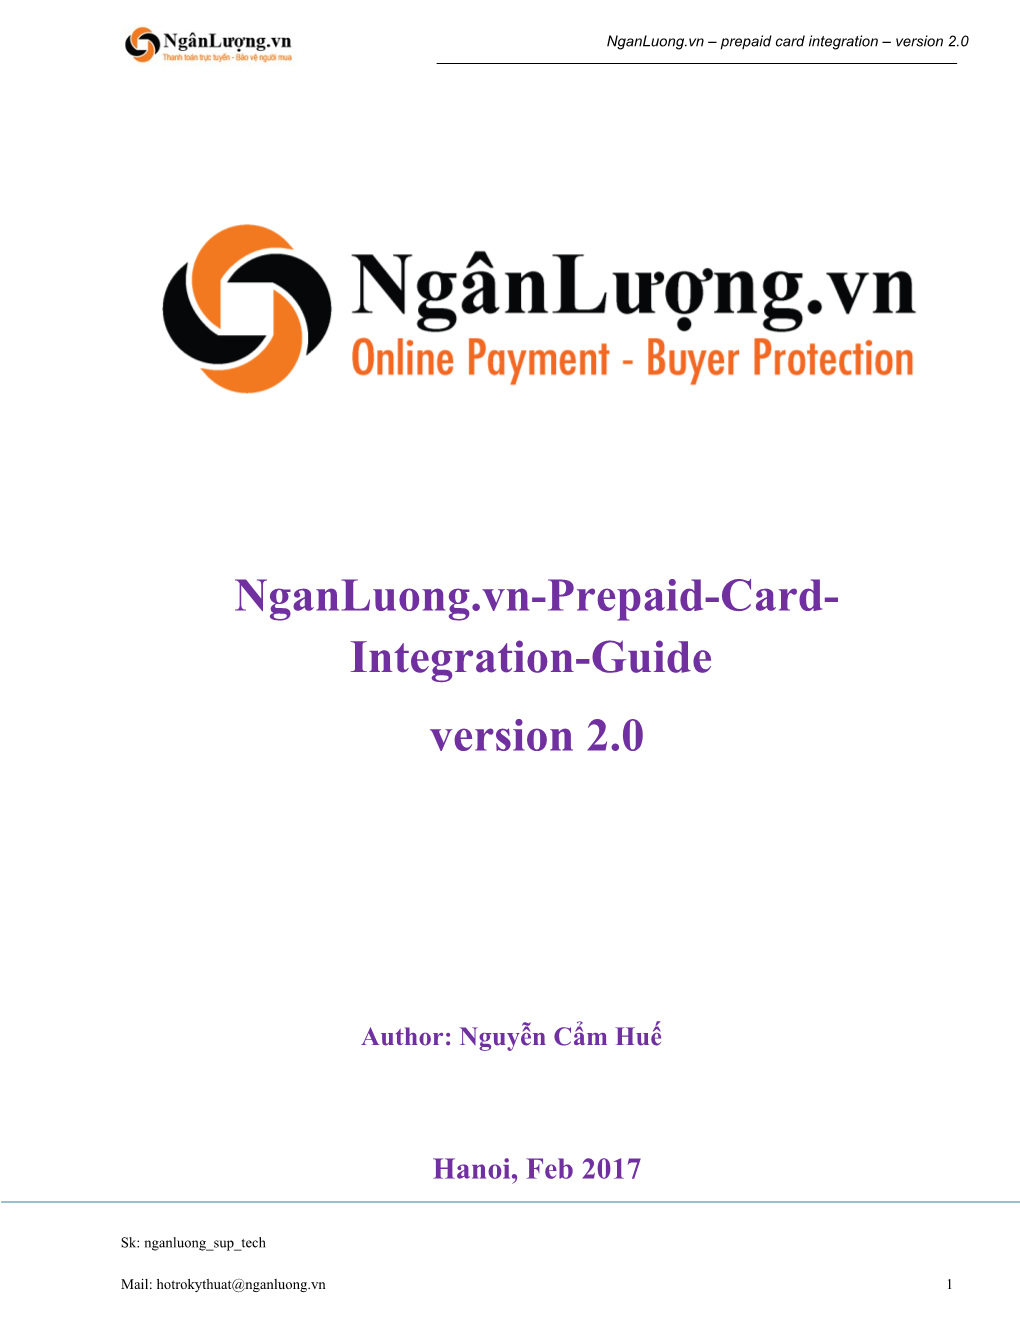 Nganluong.Vn-Prepaid-Card-Integration-Guide